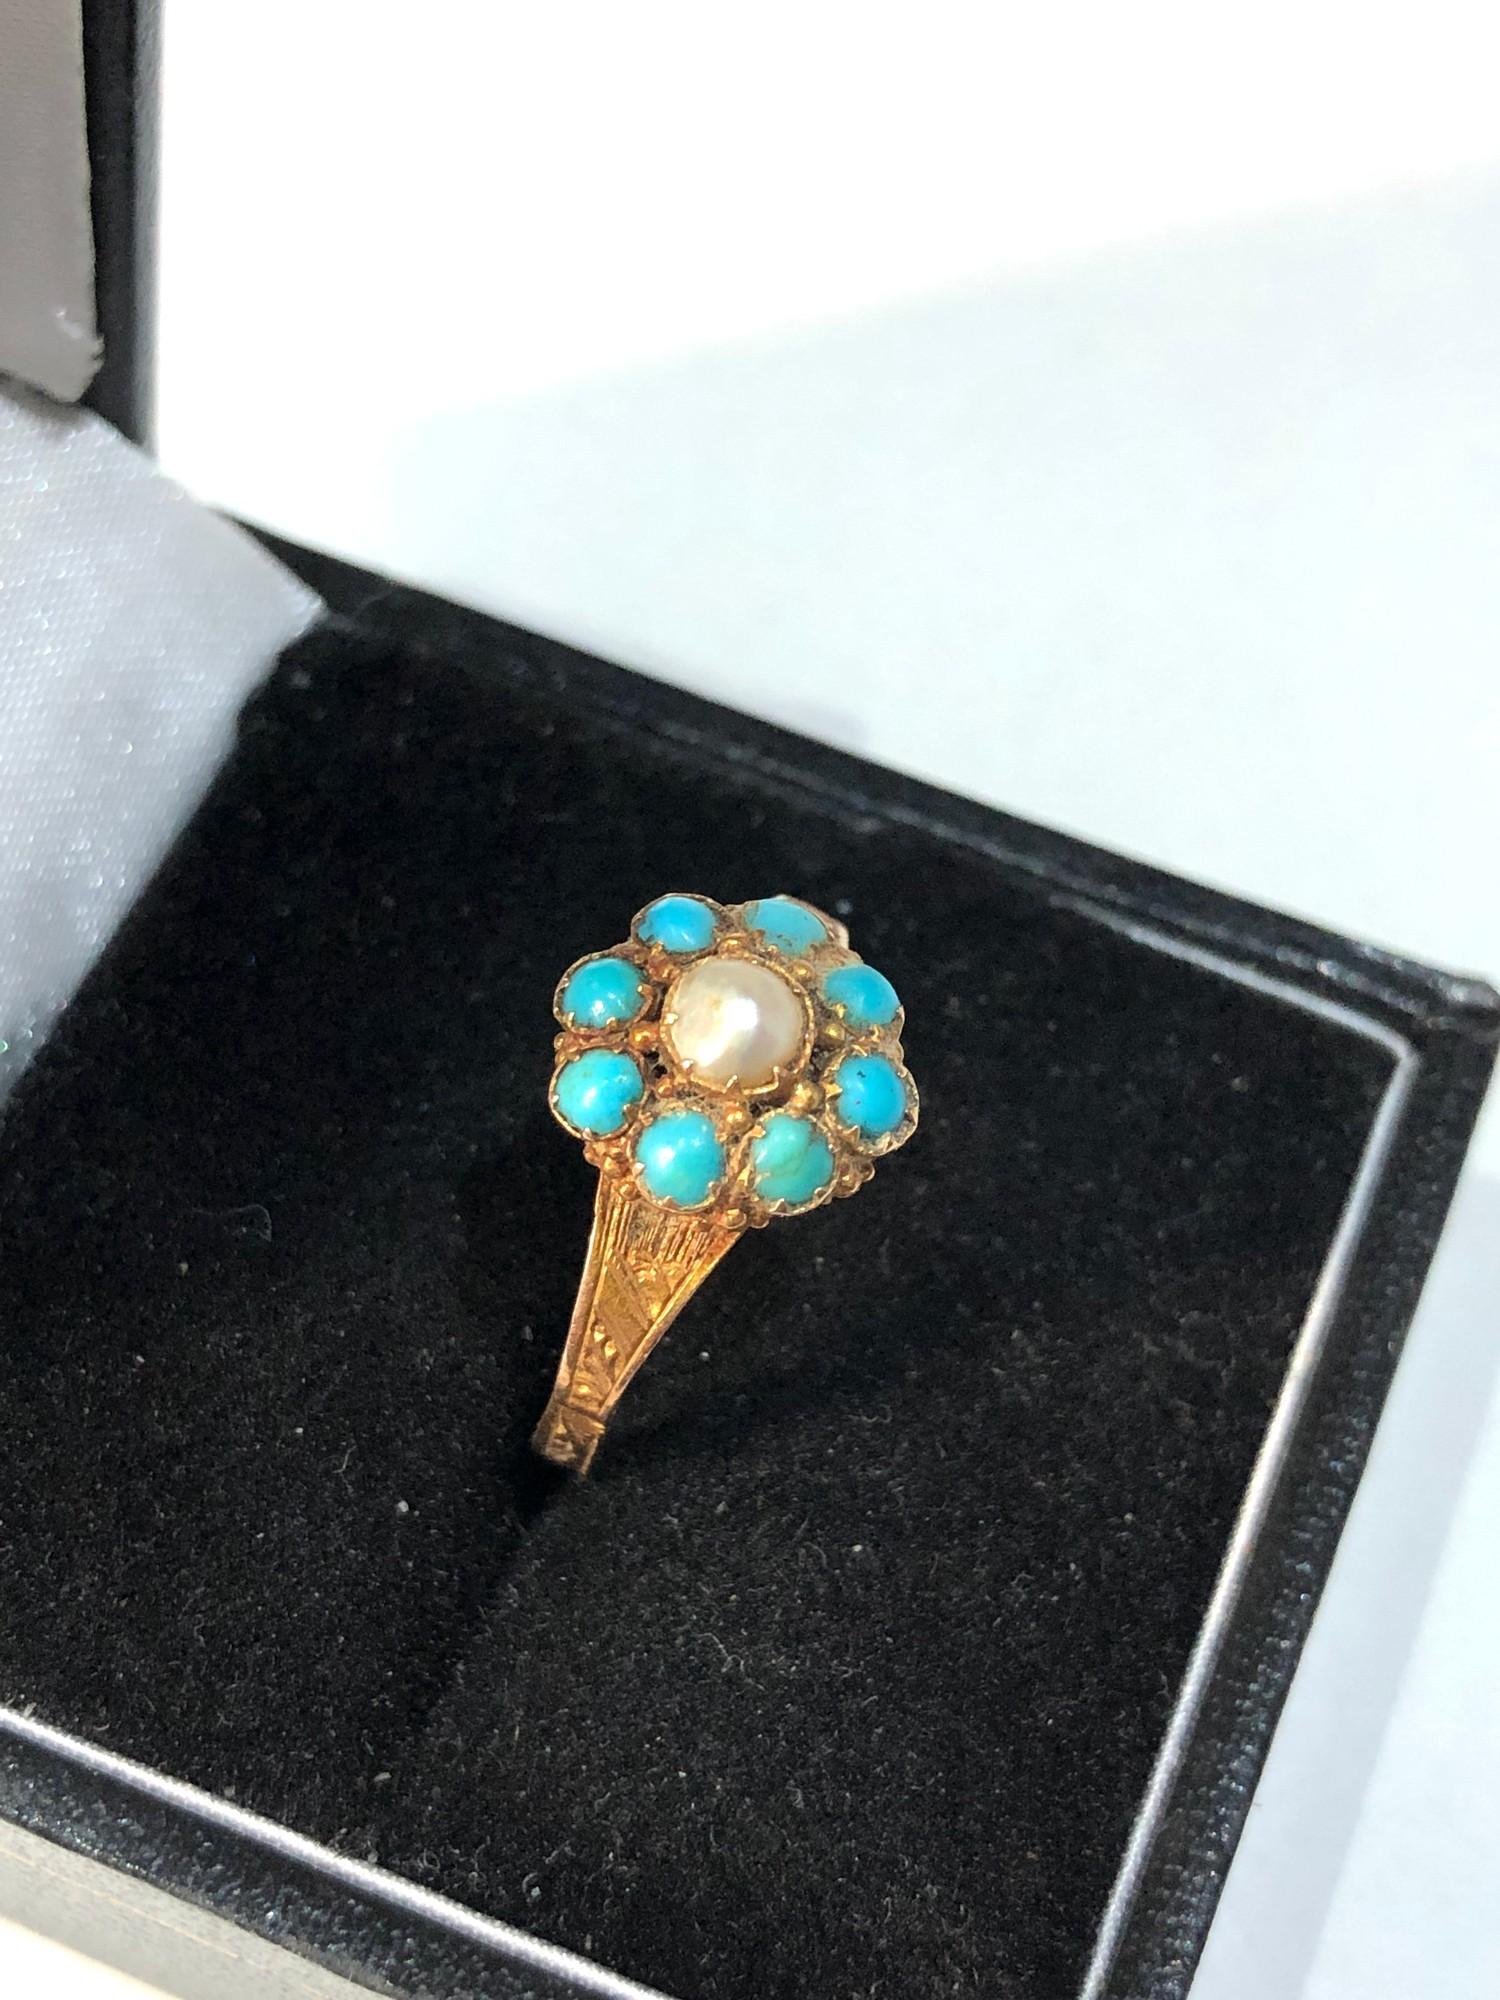 15ct gold antique turquoise and pearl ring weight 2g - Image 2 of 5